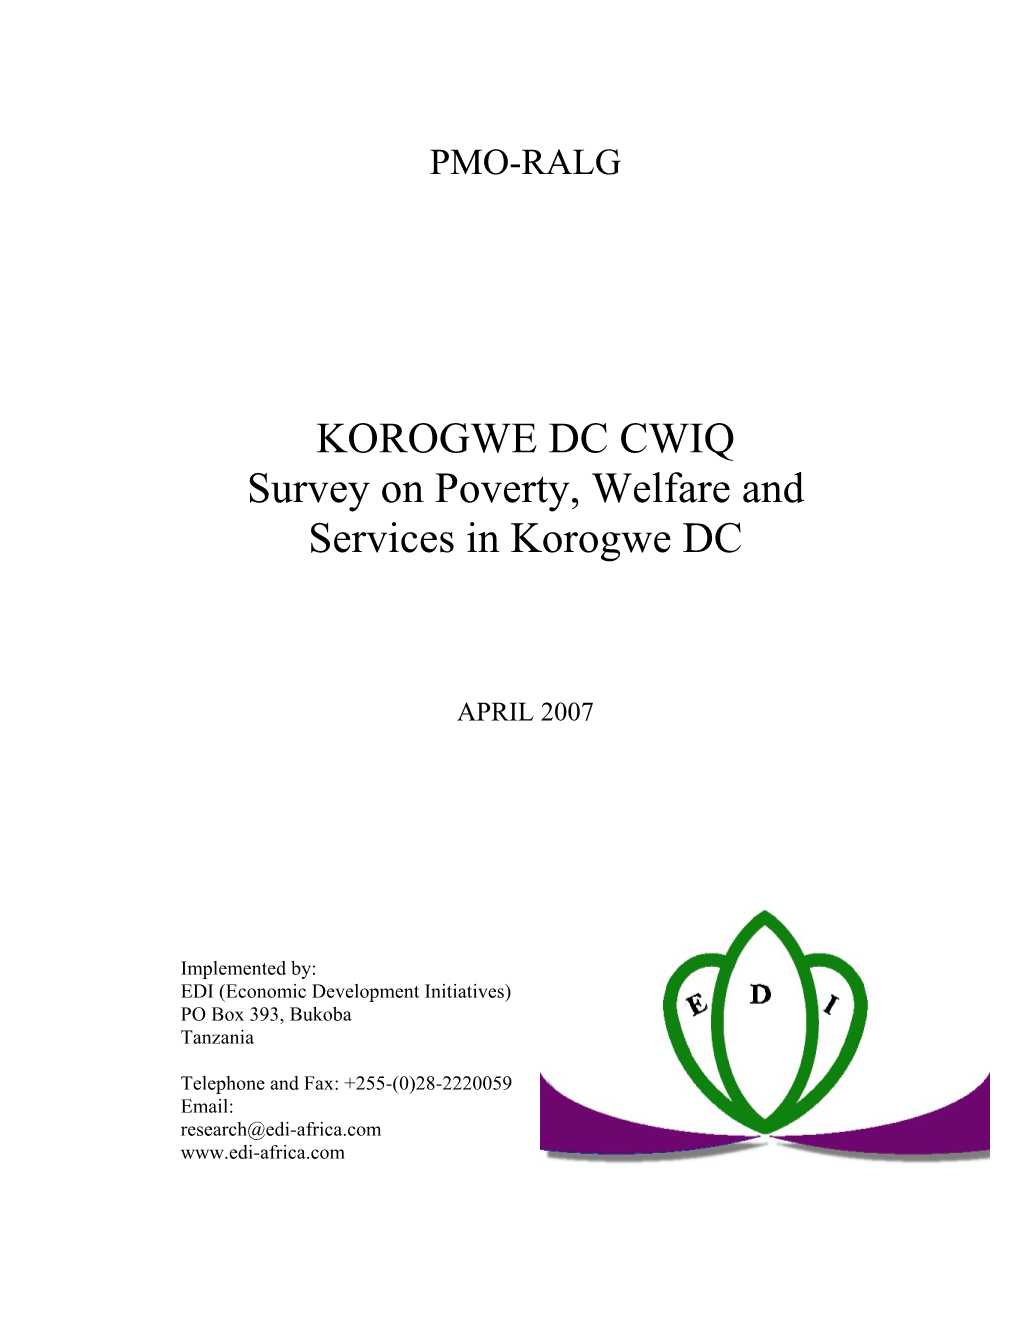 KOROGWE DC CWIQ Survey on Poverty, Welfare and Services in Korogwe DC